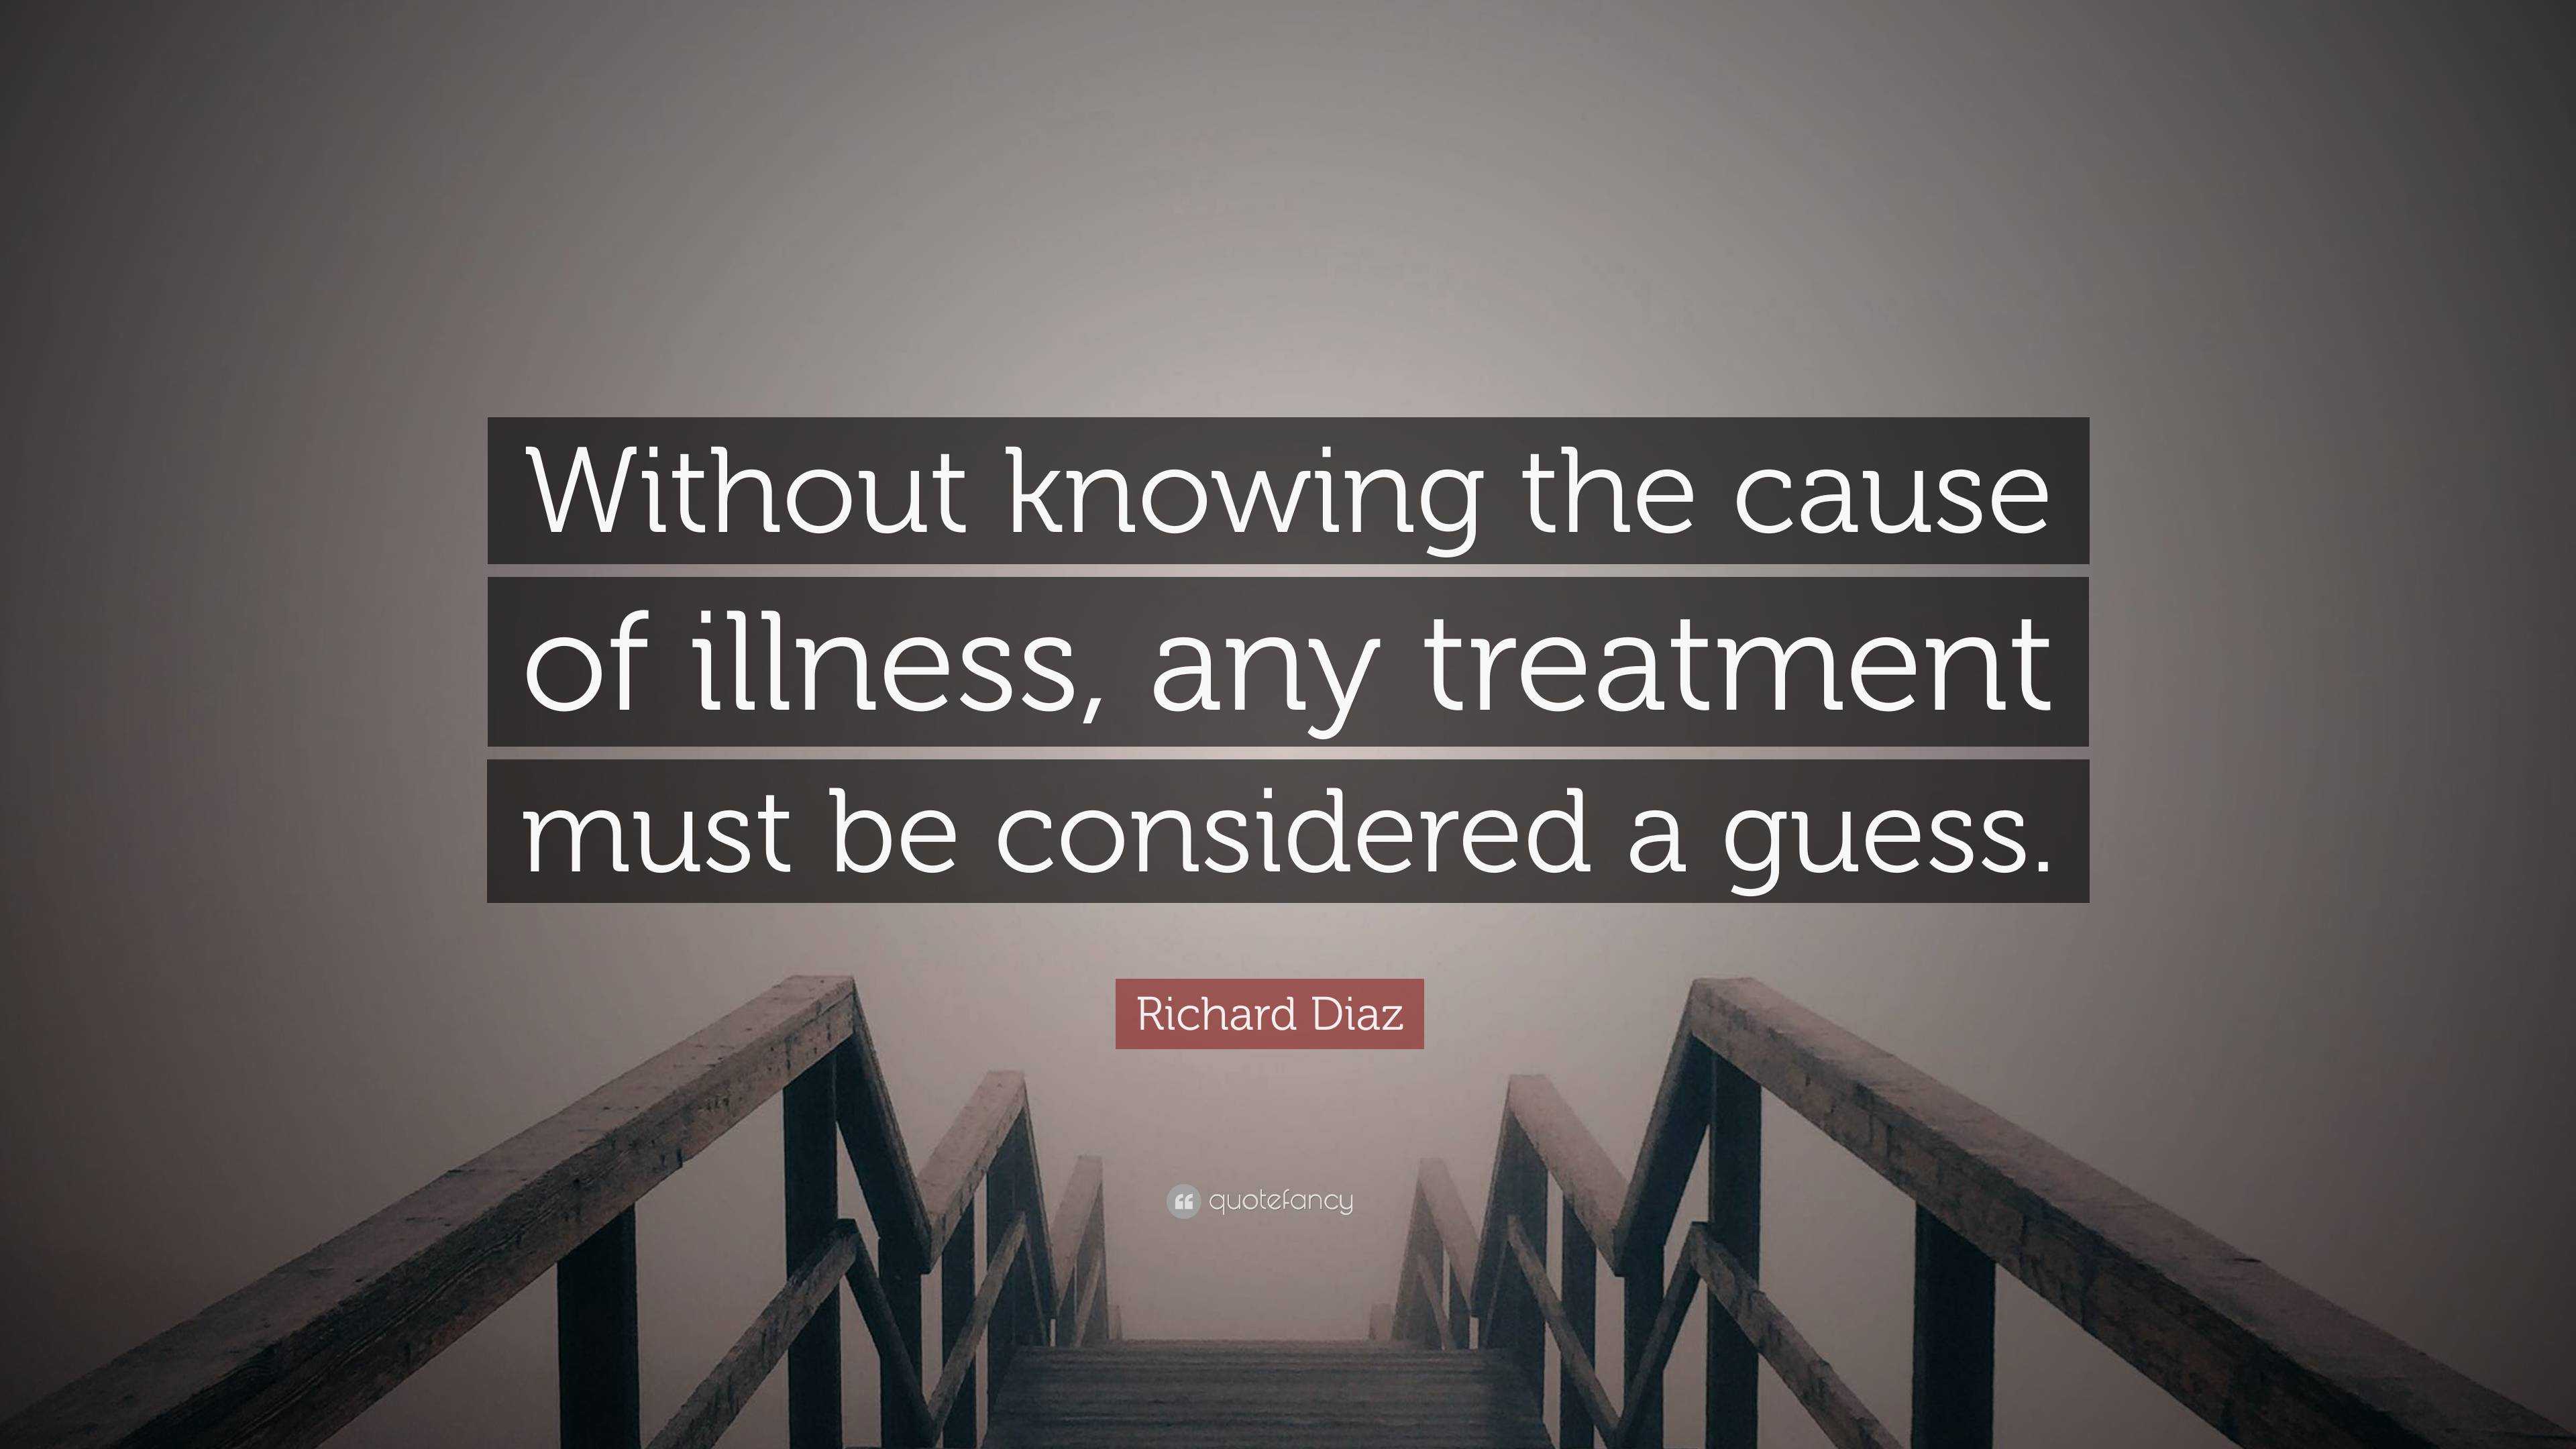 Richard Diaz Quote: the of illness, any must be considered a guess.”